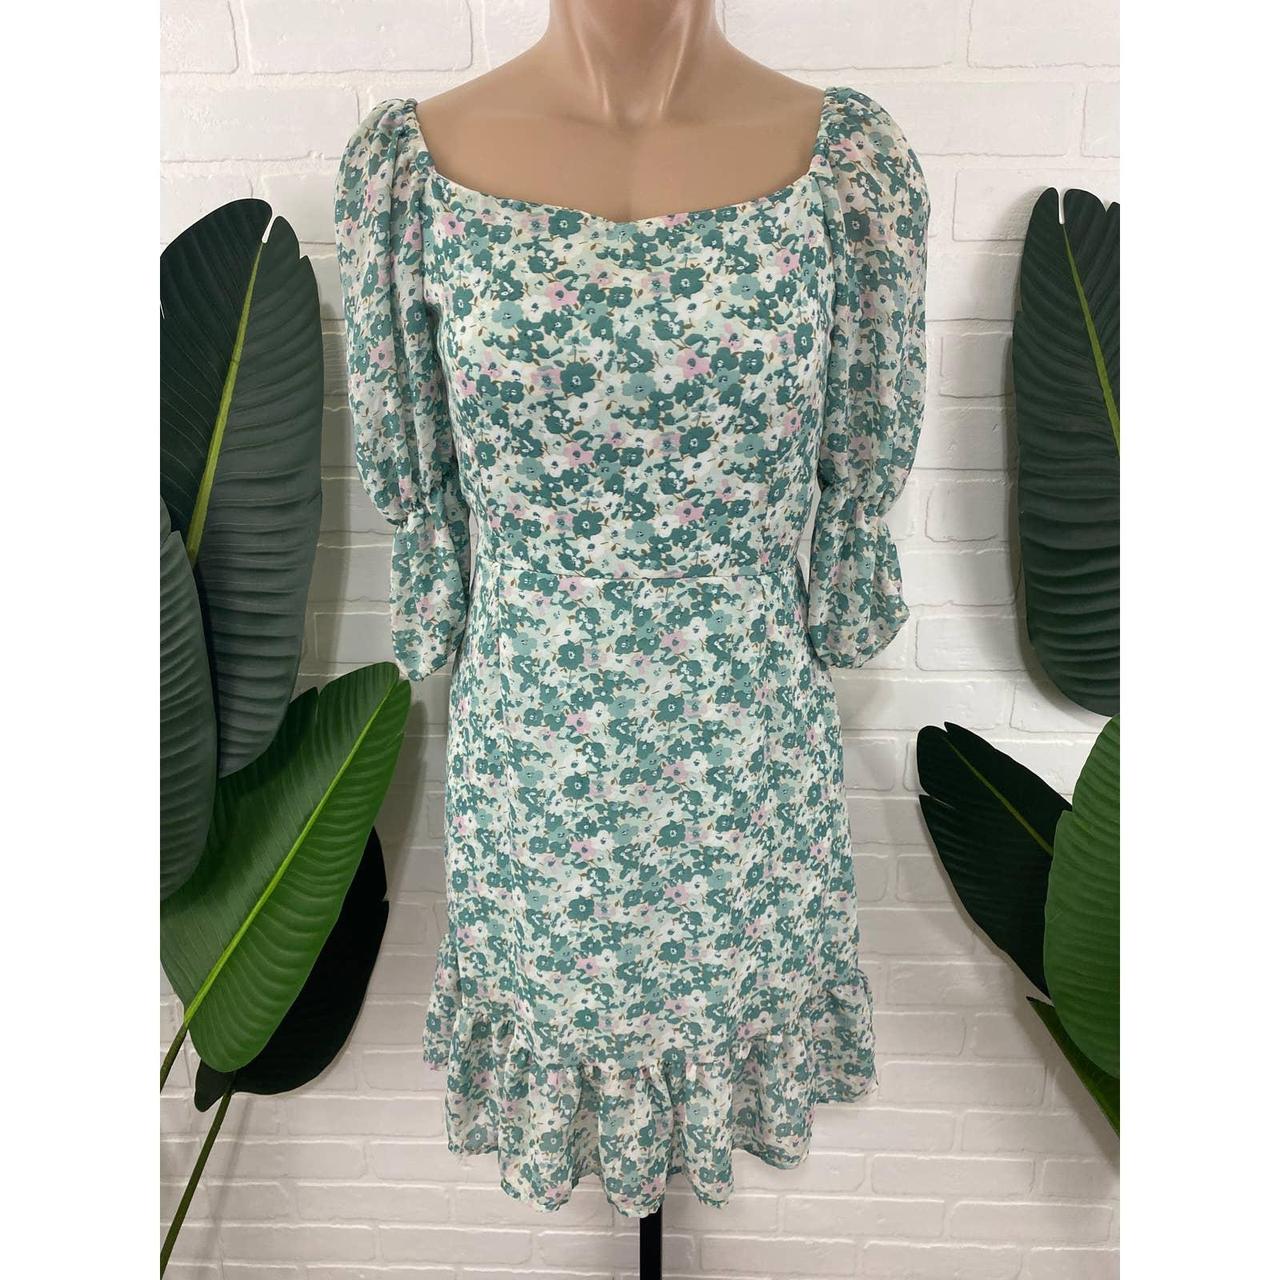 Product Image 4 - No Paypal

Floral green sundress. Can